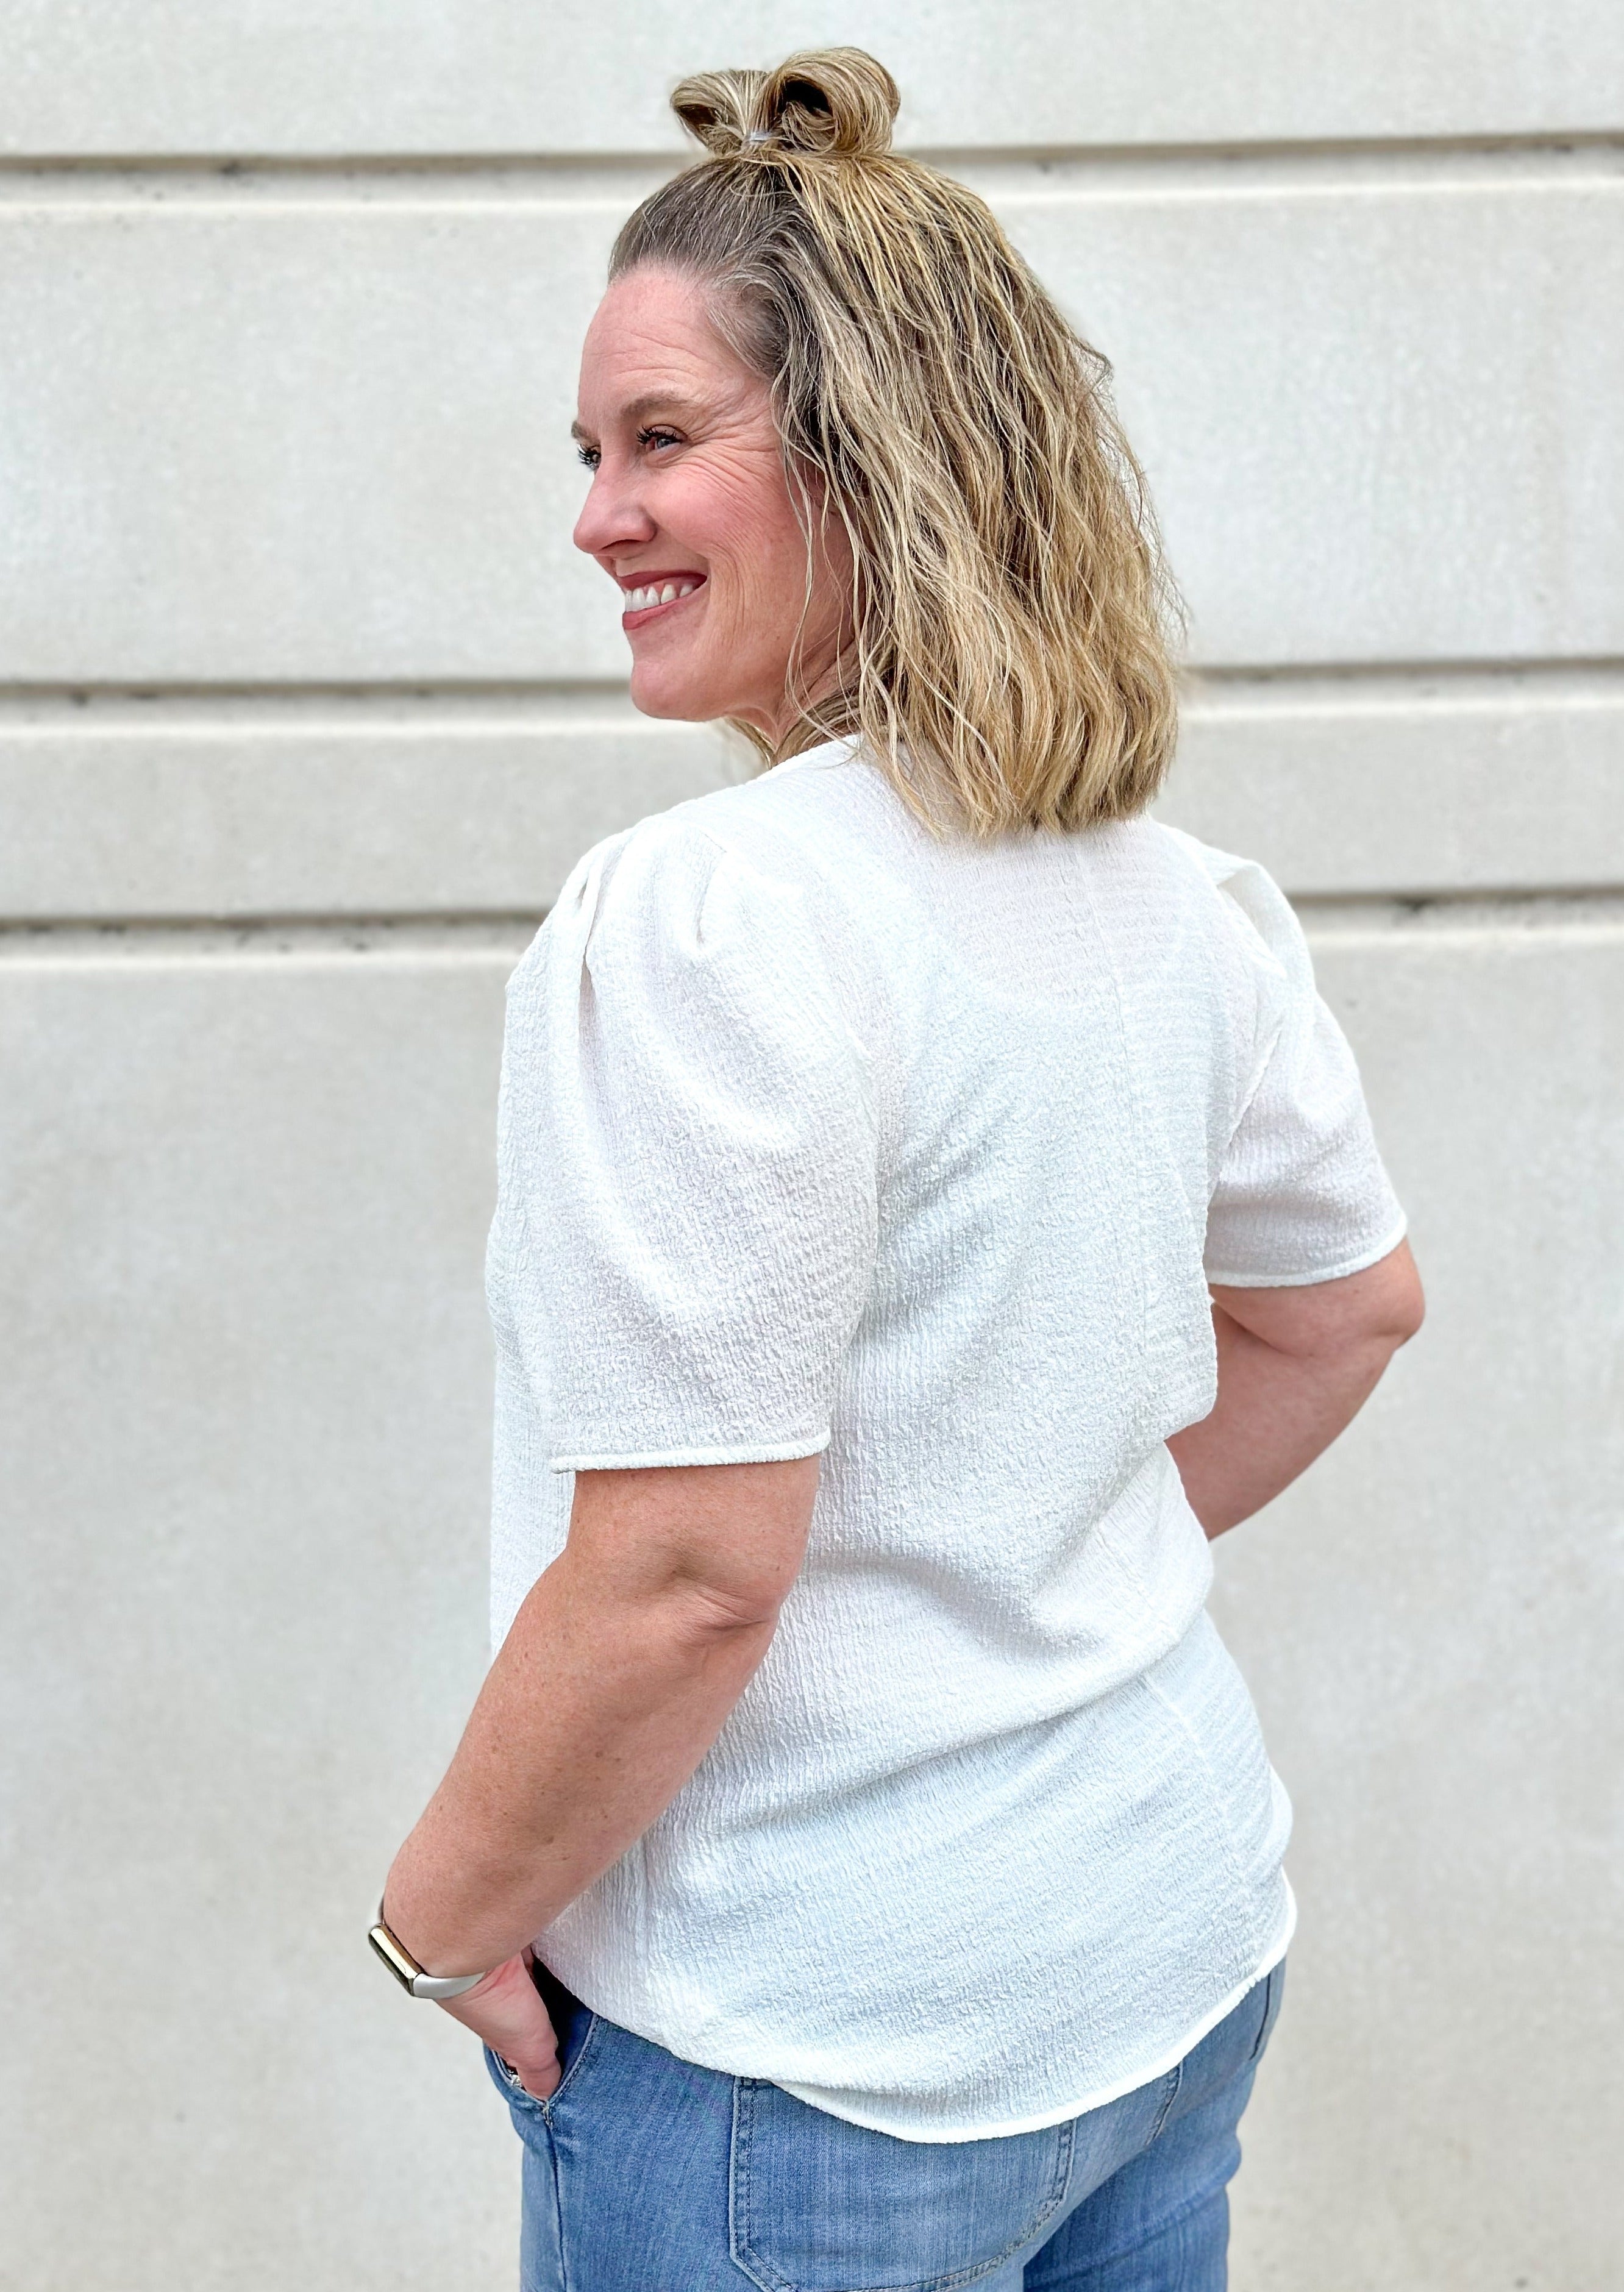 Ivory Bubble Puff Short Sleeve Top.  A great staple with a cute sleeve!  Elevate your basics in this lightweight textured top.